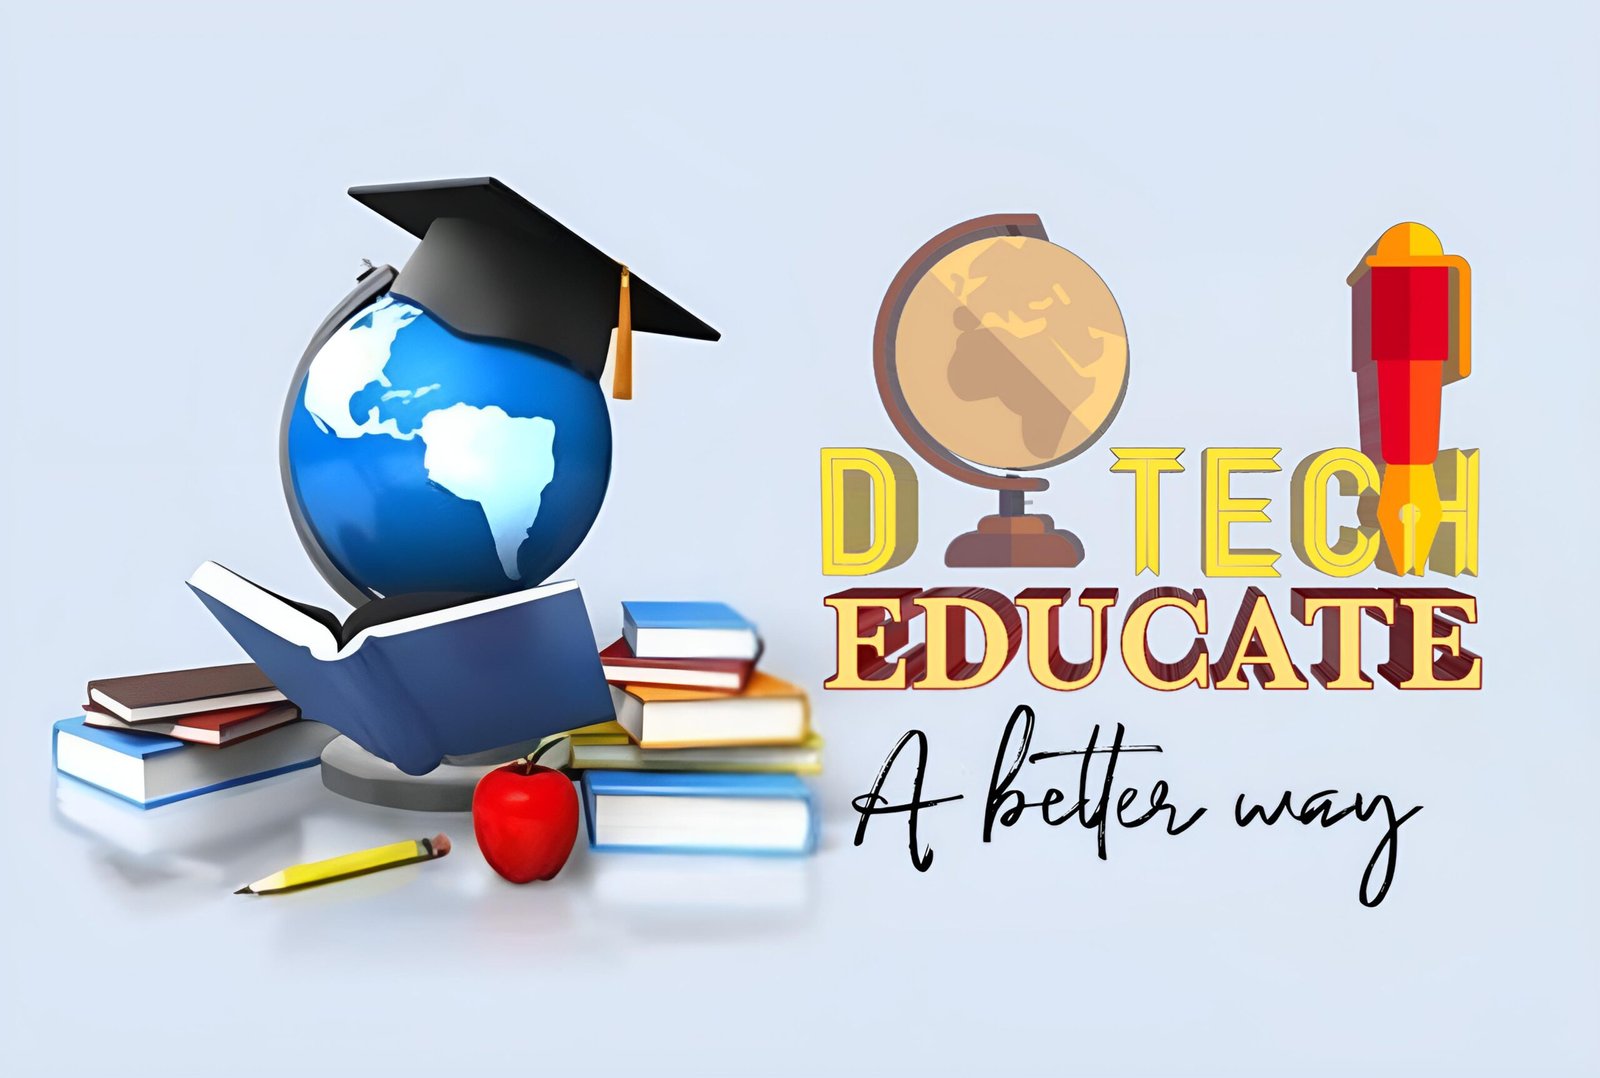 dtecheducate